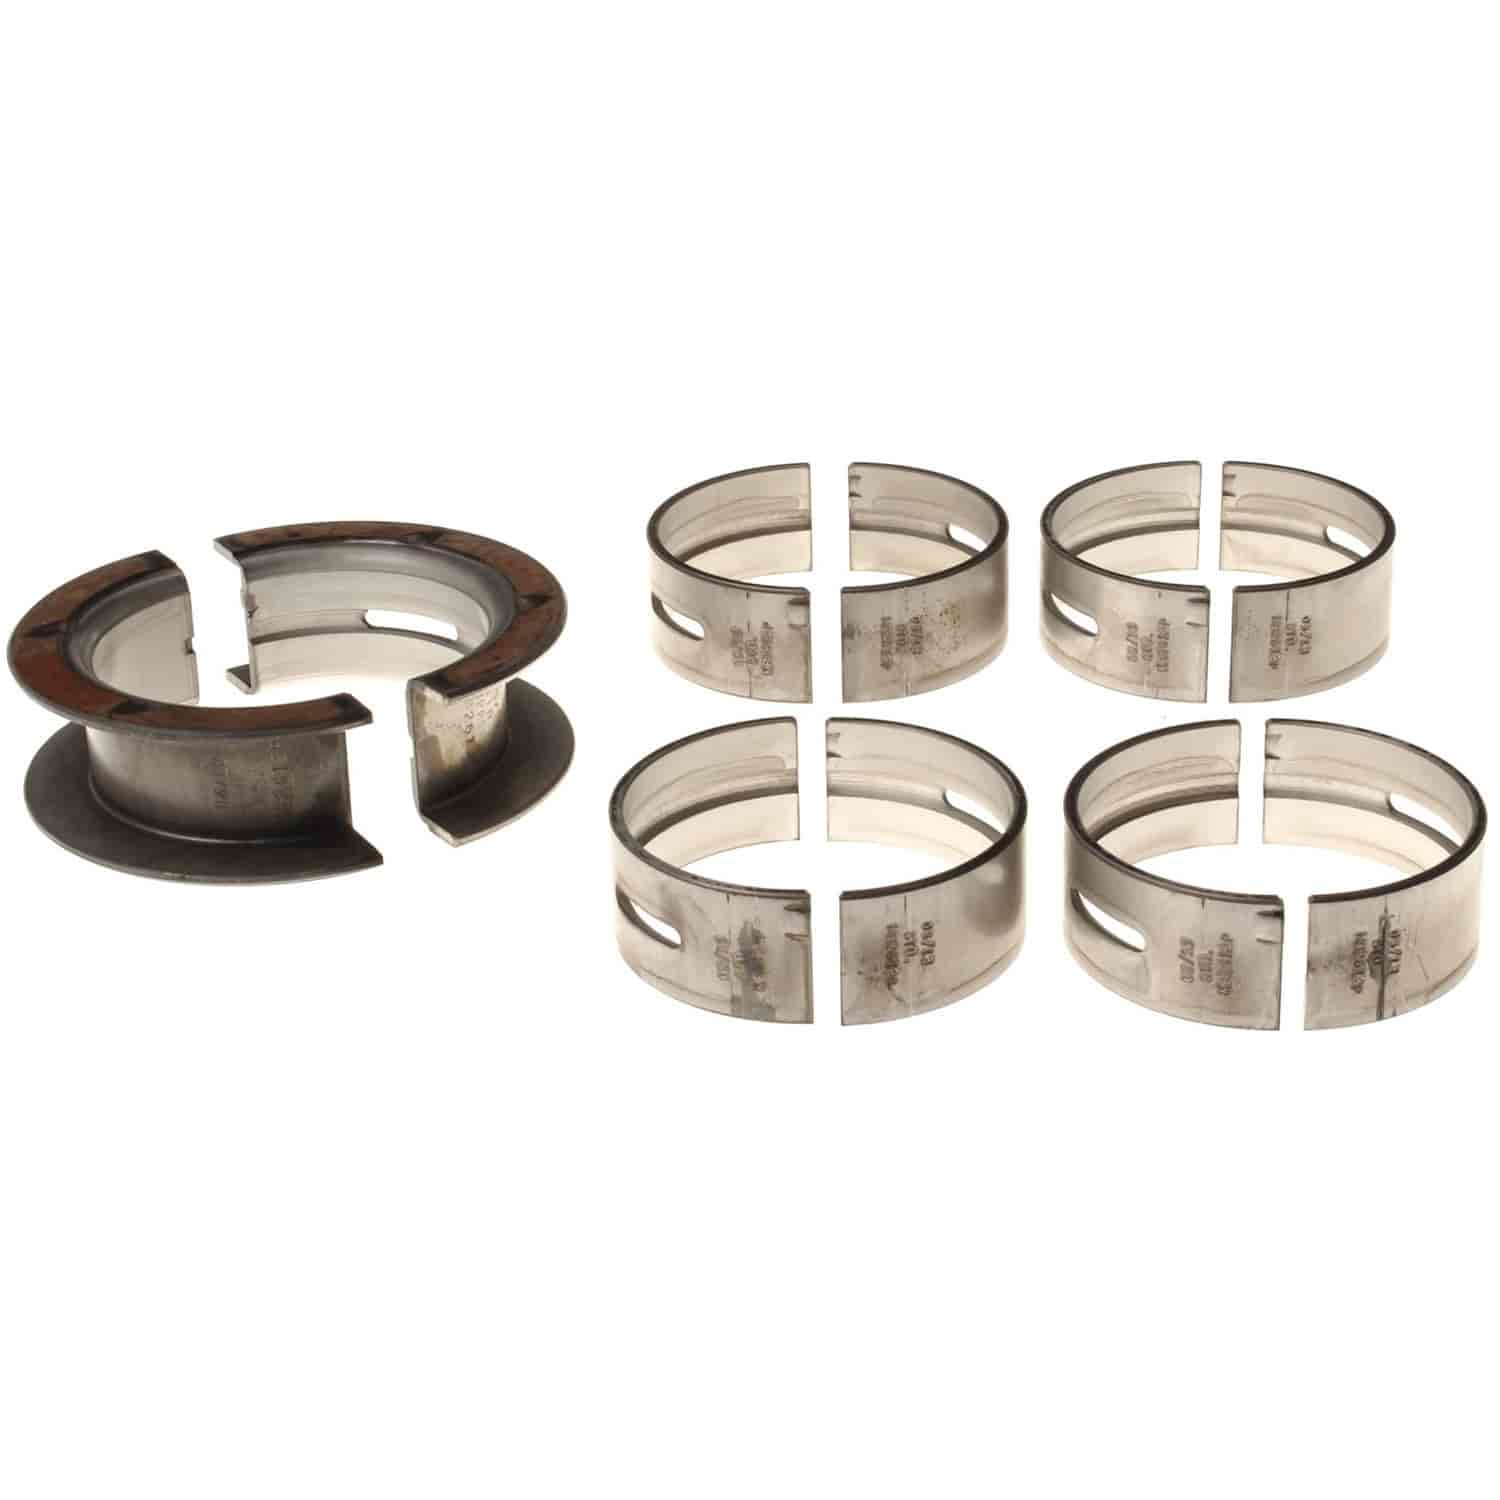 Main Bearing Set Ford 1974-1997 L4 2.0/2.3L with -.75mm Undersize